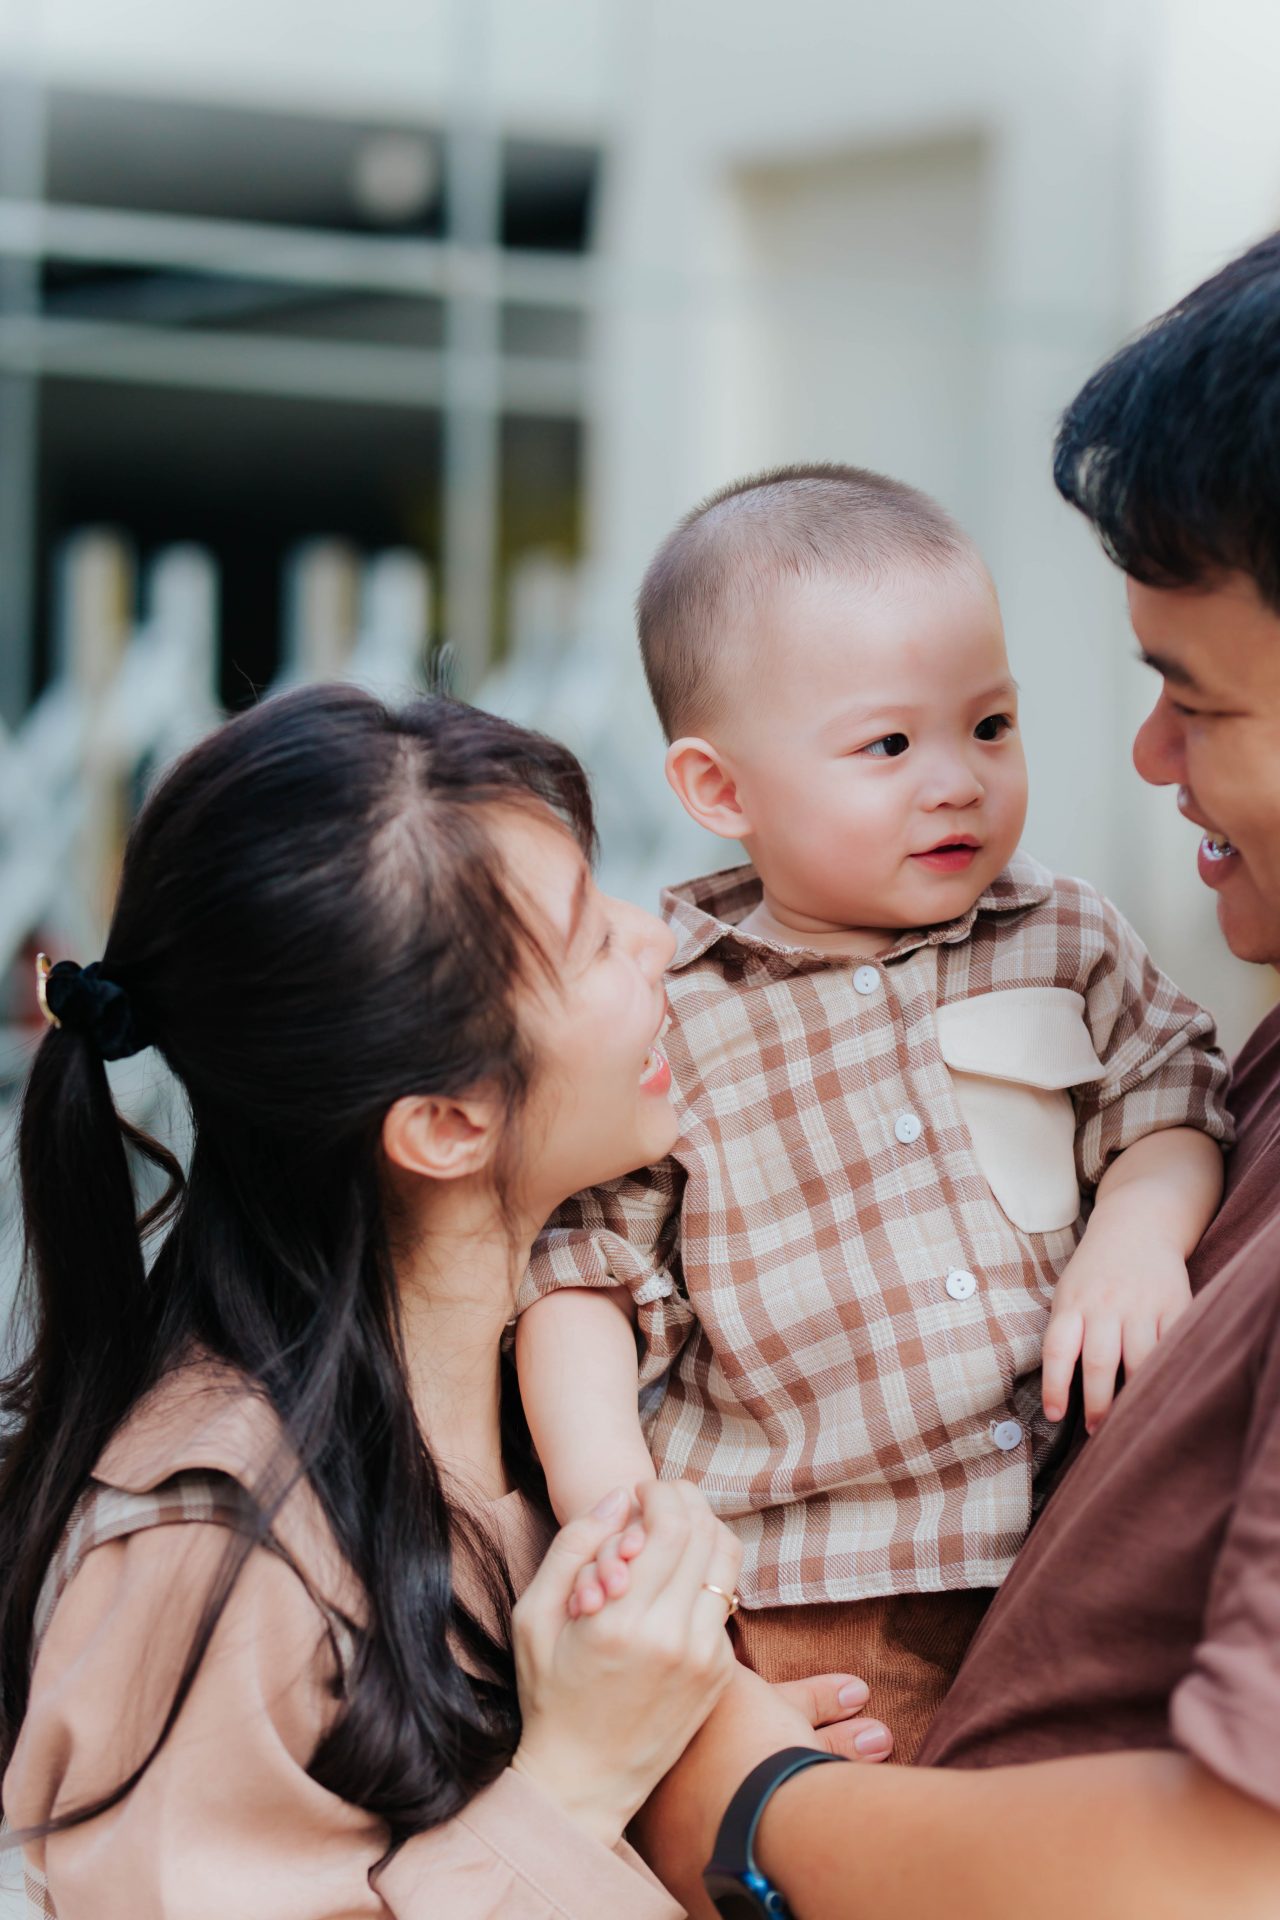 A family portrait does not need to cost a fortune. Our low-priced package for a family of three will give you the best professional photographs that will exceed your expectations. Get your family portrait on a budget now!